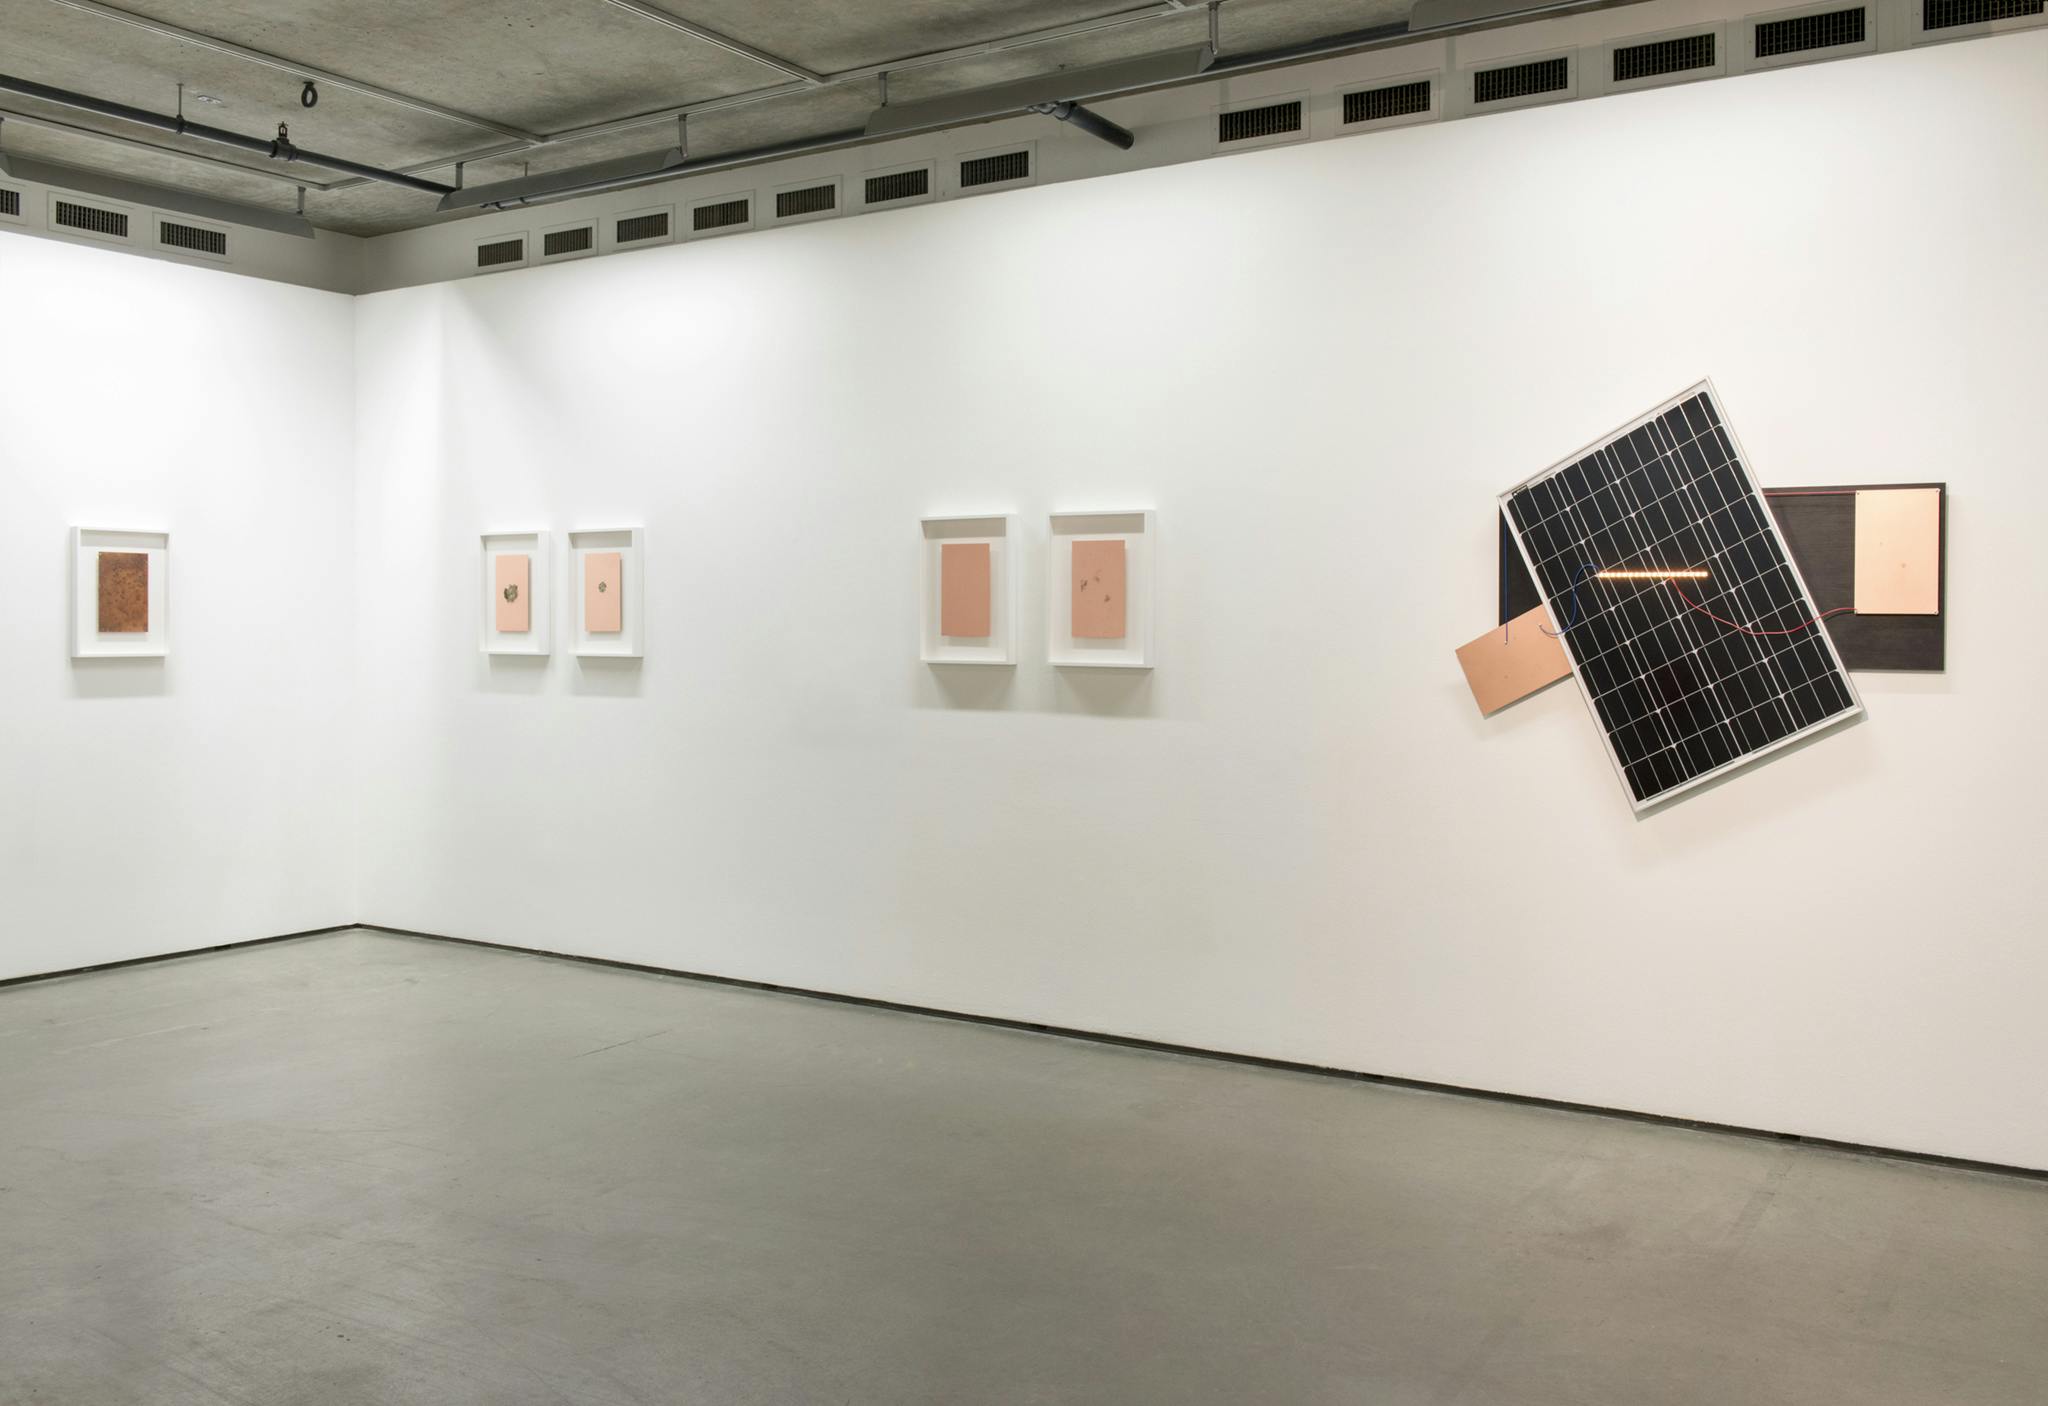 Framed copper plates are mounted on two gallery walls. A large flat sculpture made of a solar panel, a bar of small orange LED lights, electrical wires, and copper plates are also mounted on a wall.